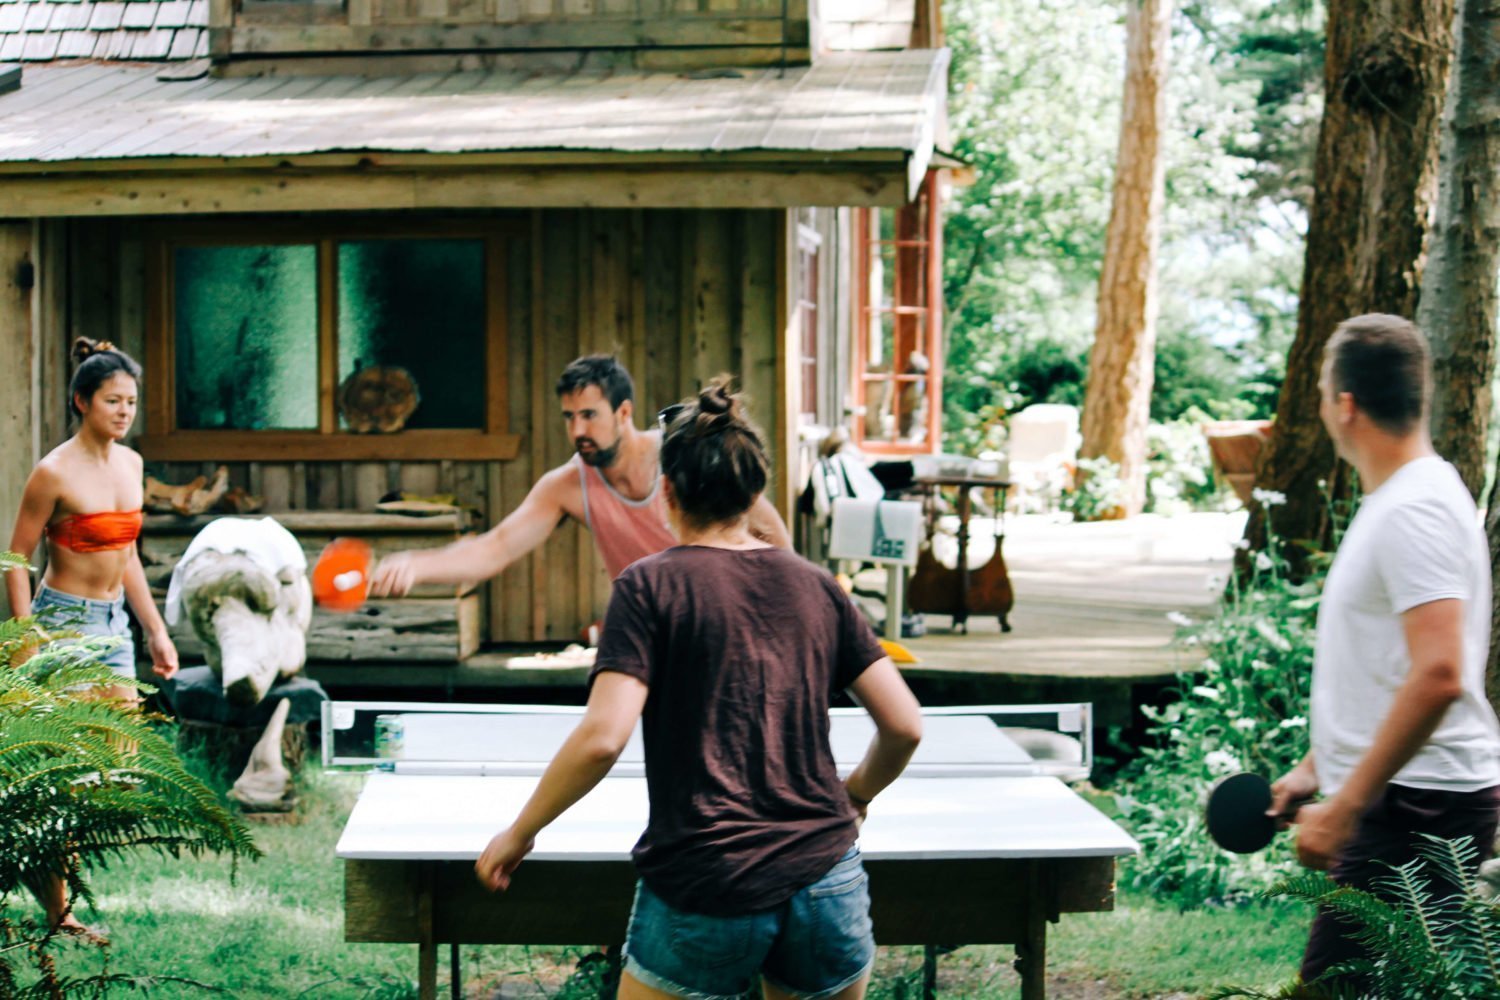 outdoor ping pong game on savary island